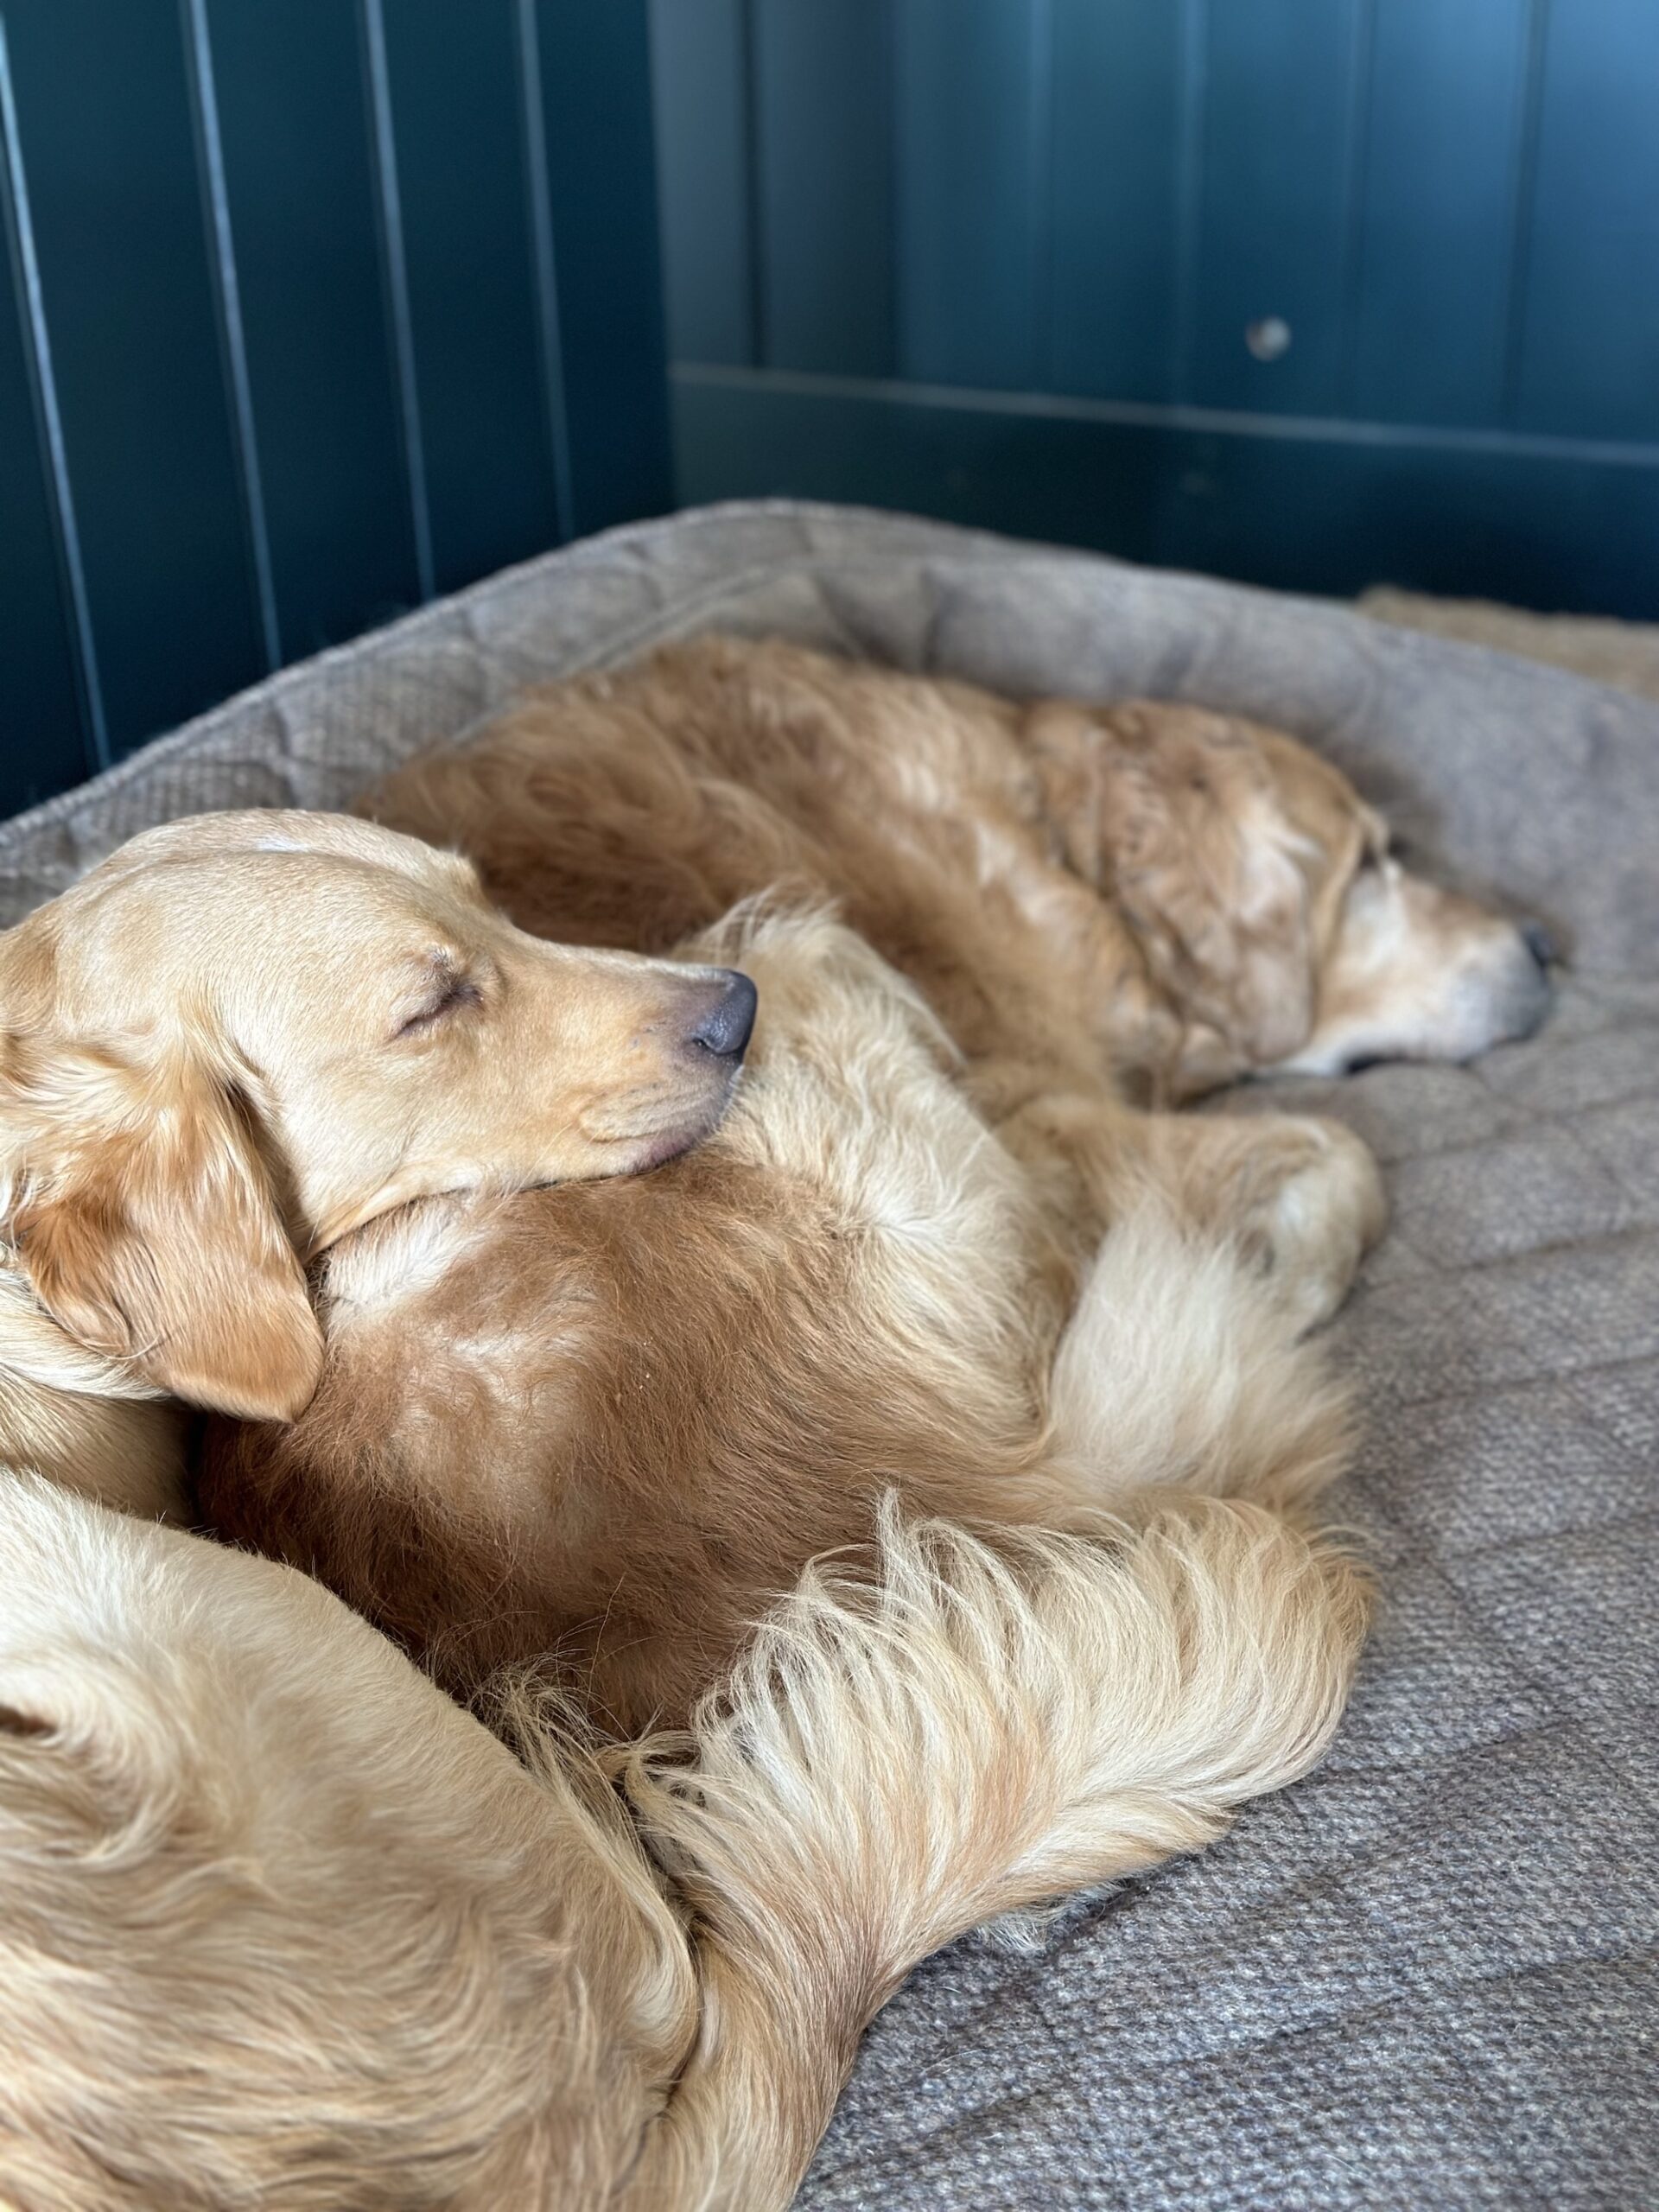 Golden retriever dogs snuggled up asleep on giant dog bed